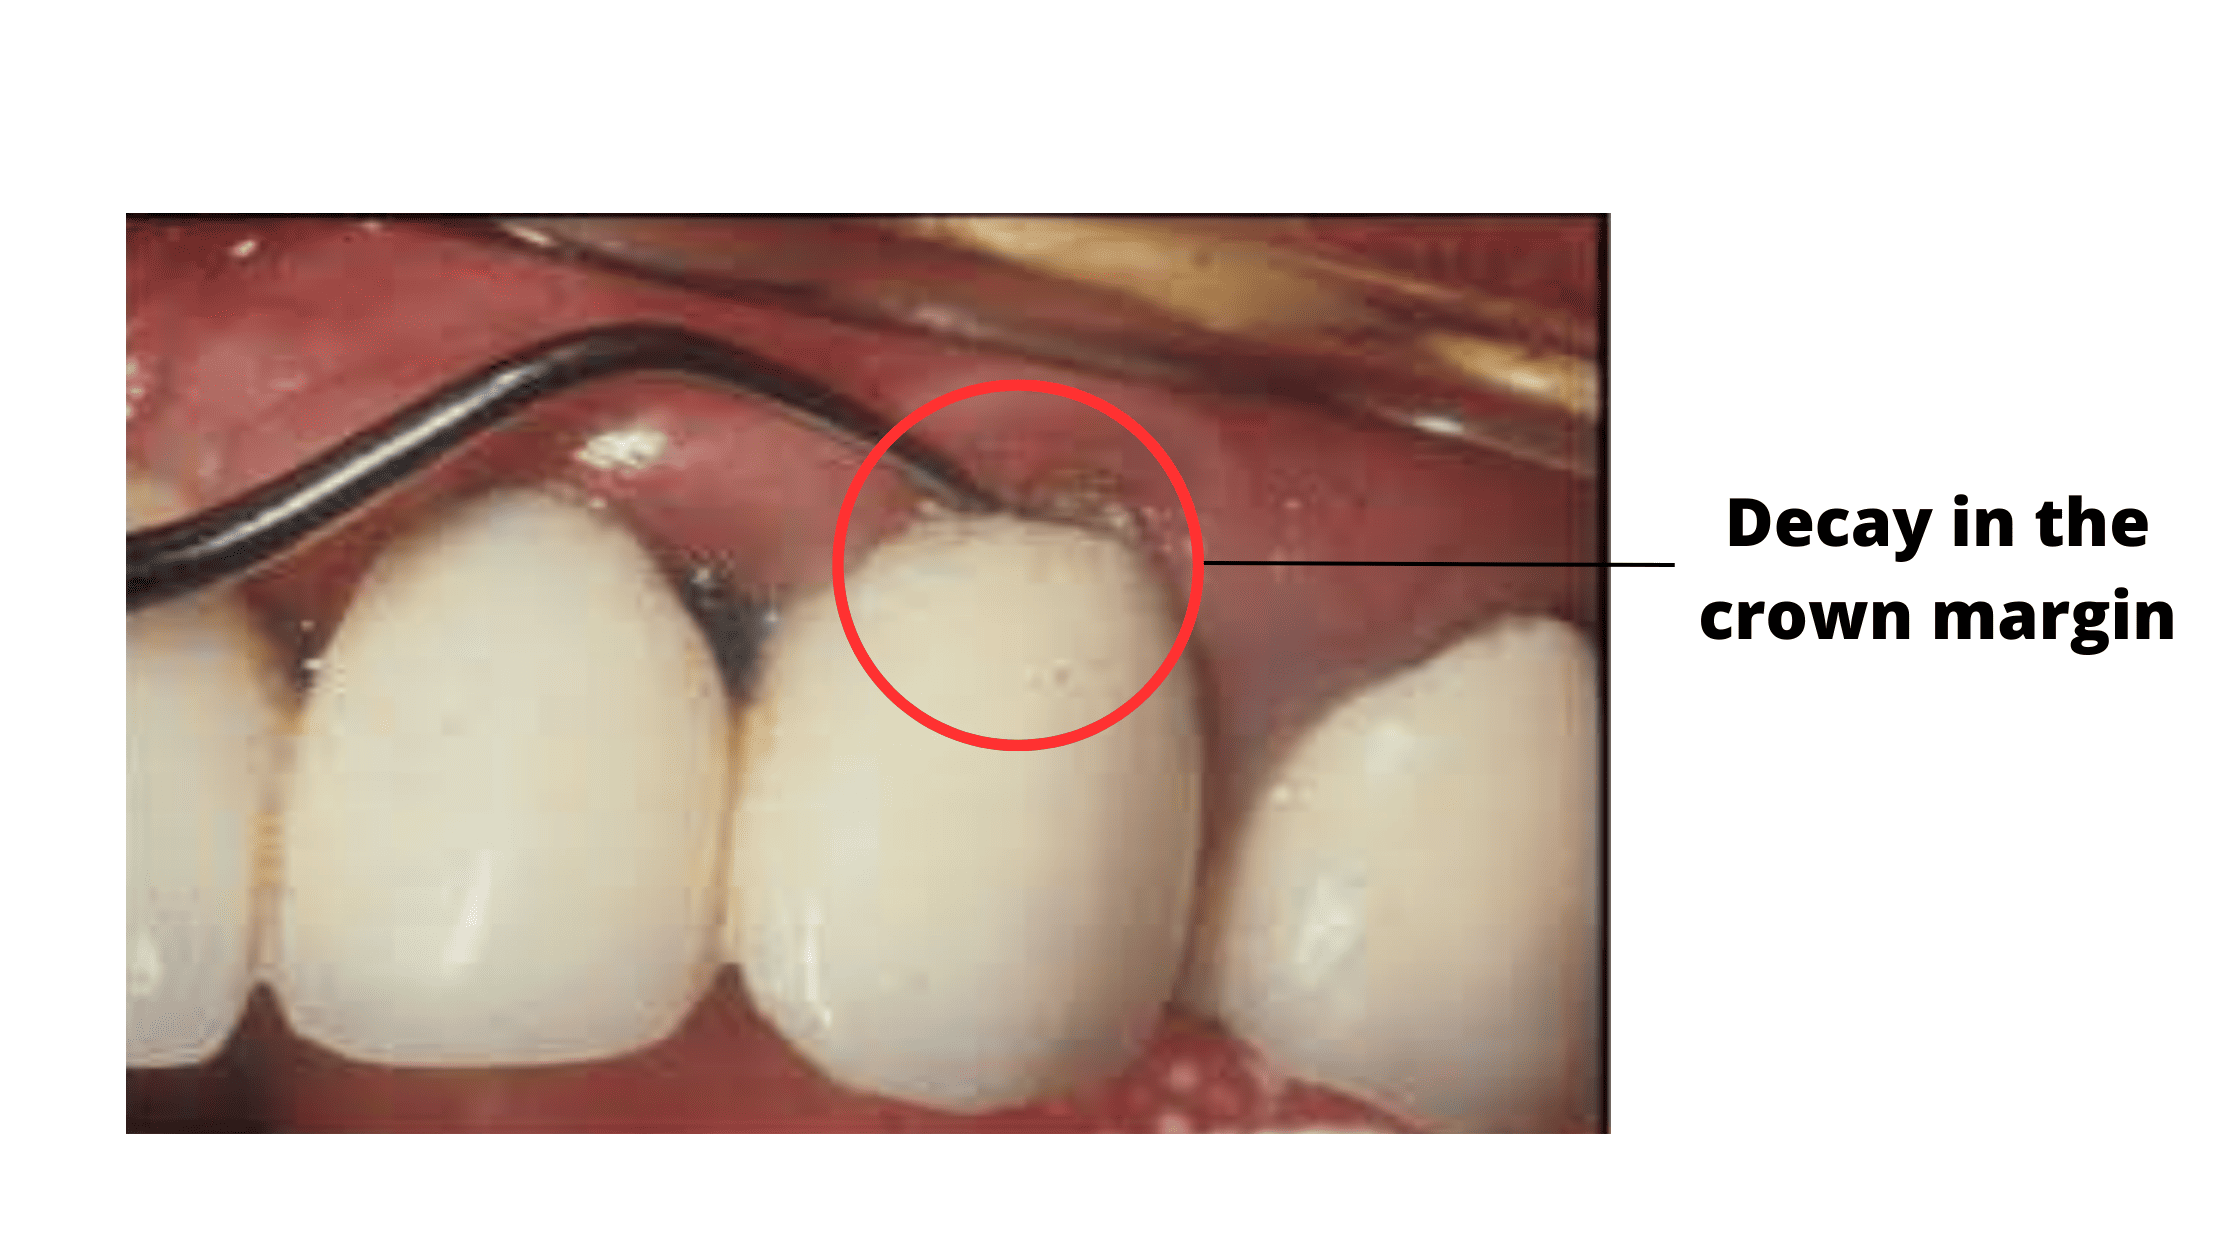 Tooth decay in the crown margin